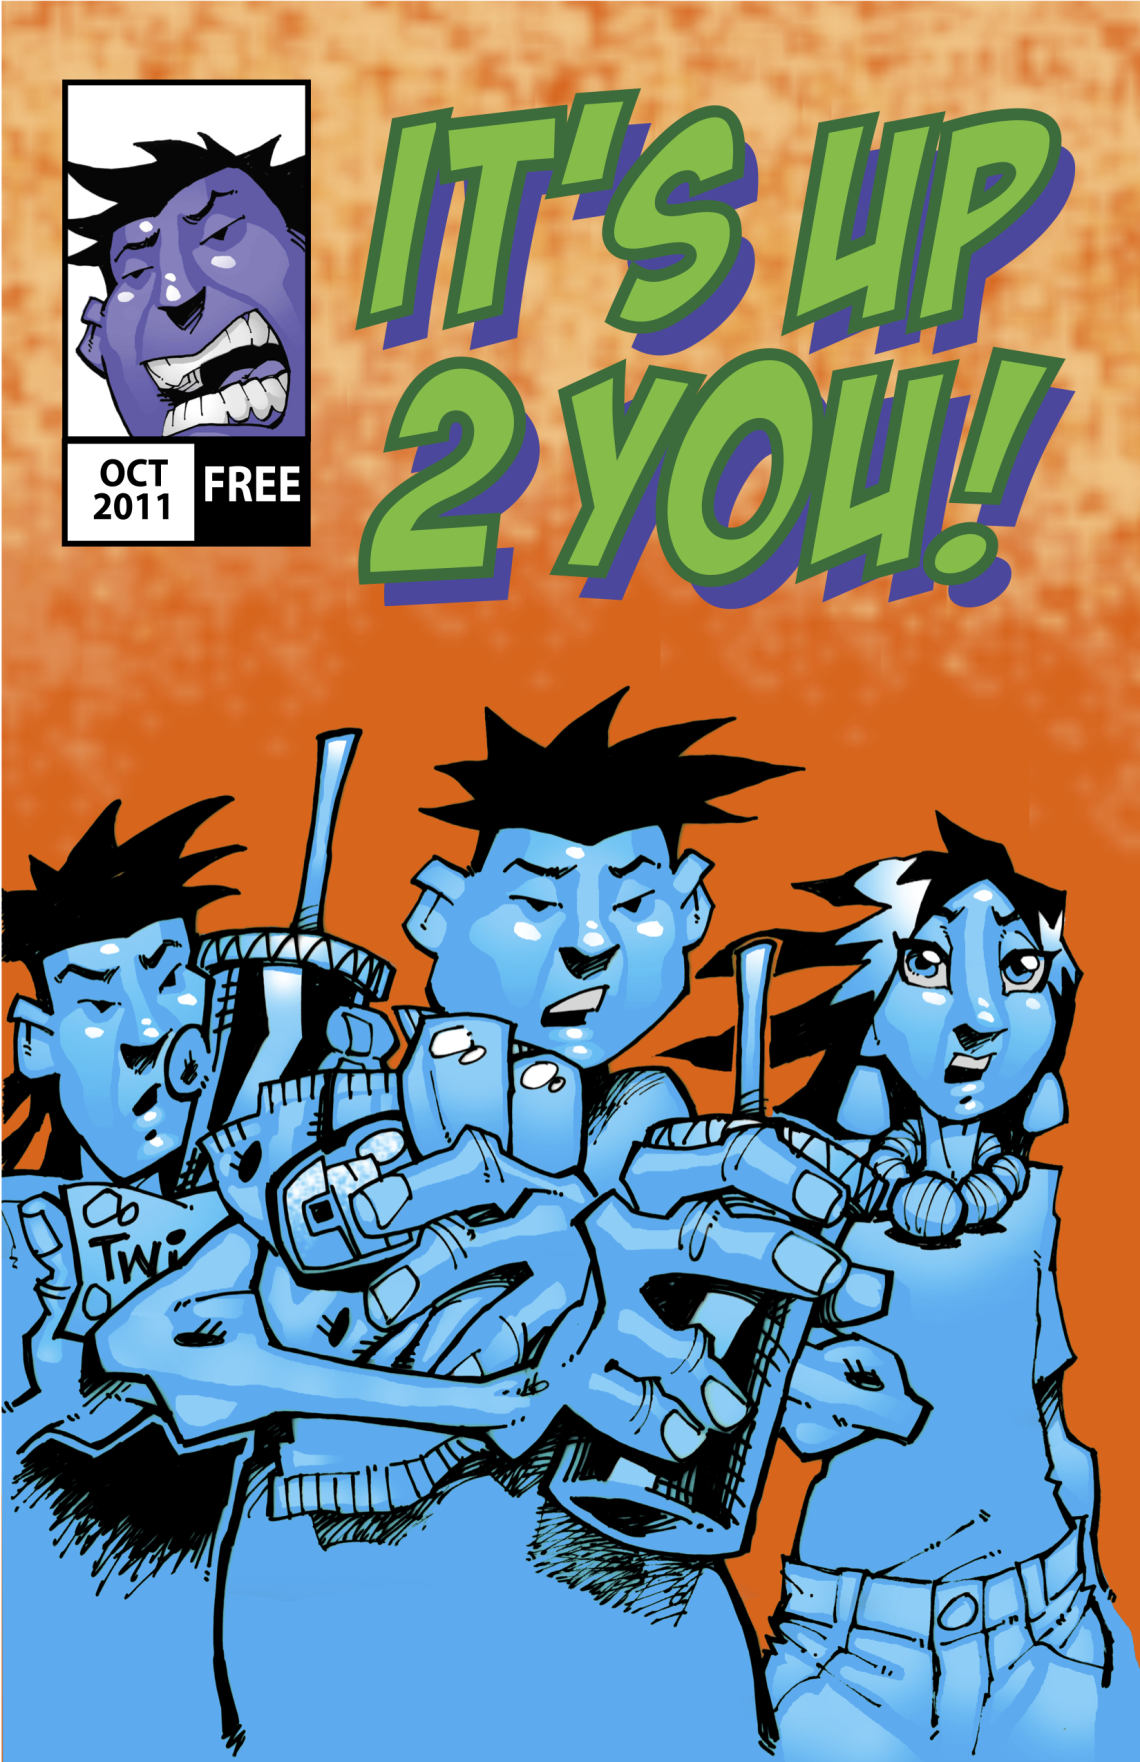 Cover of the "It's Up 2 You!" comic book